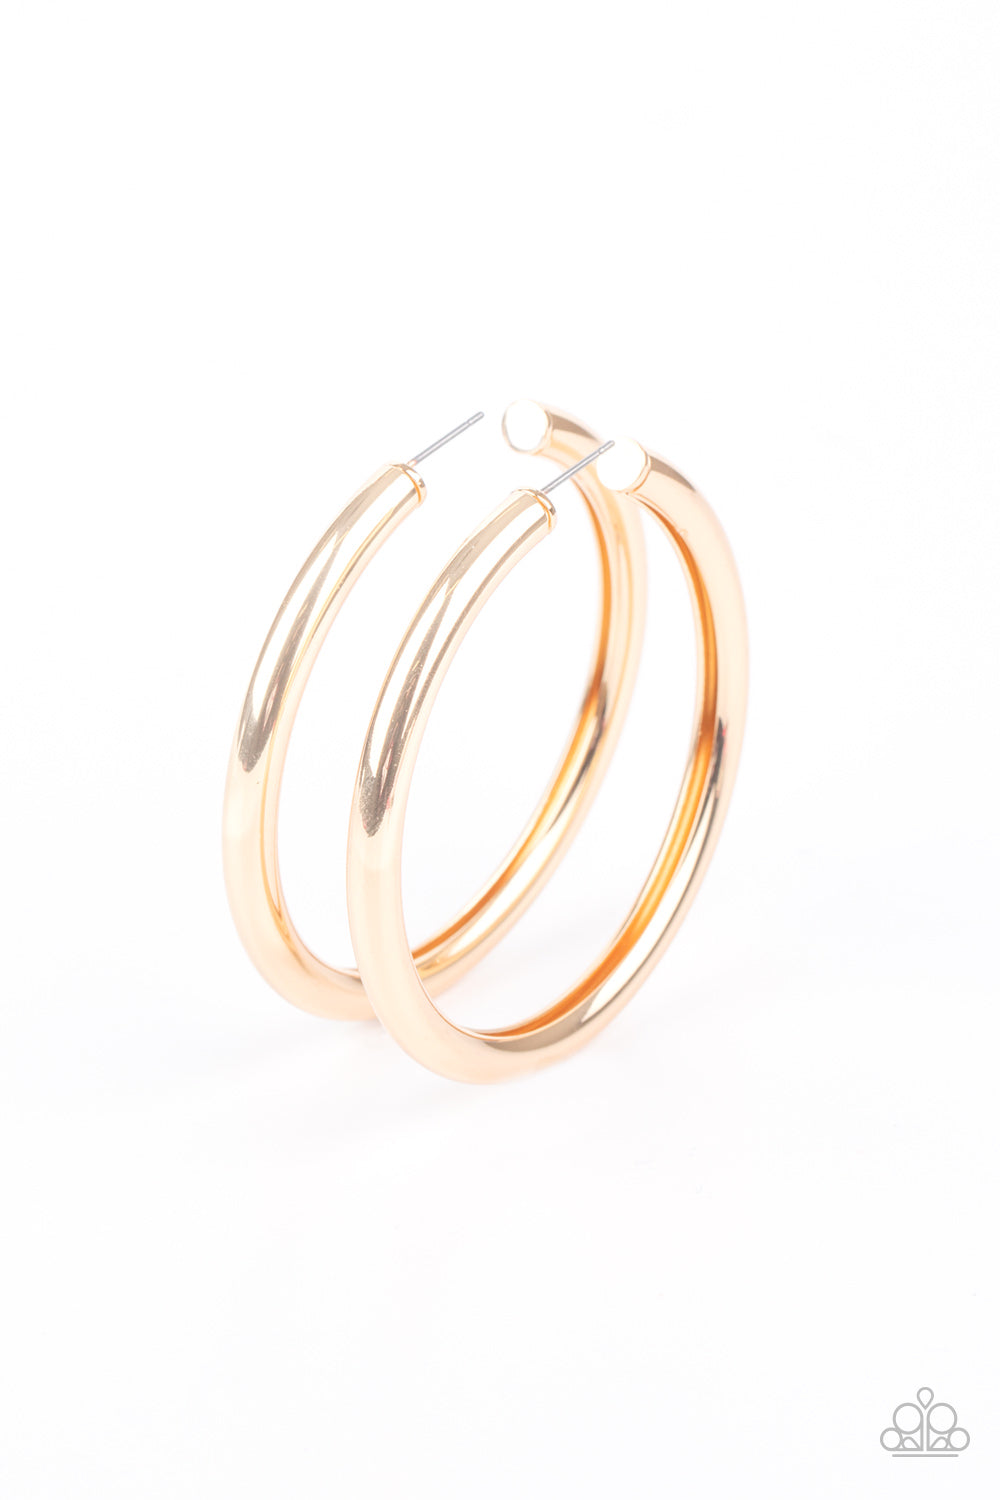 Paparazzi Accessories earrings a thick gold bar delicately curls into a glistening oversized hoop for a retro look. Earring attaches to a standard post fitting. 